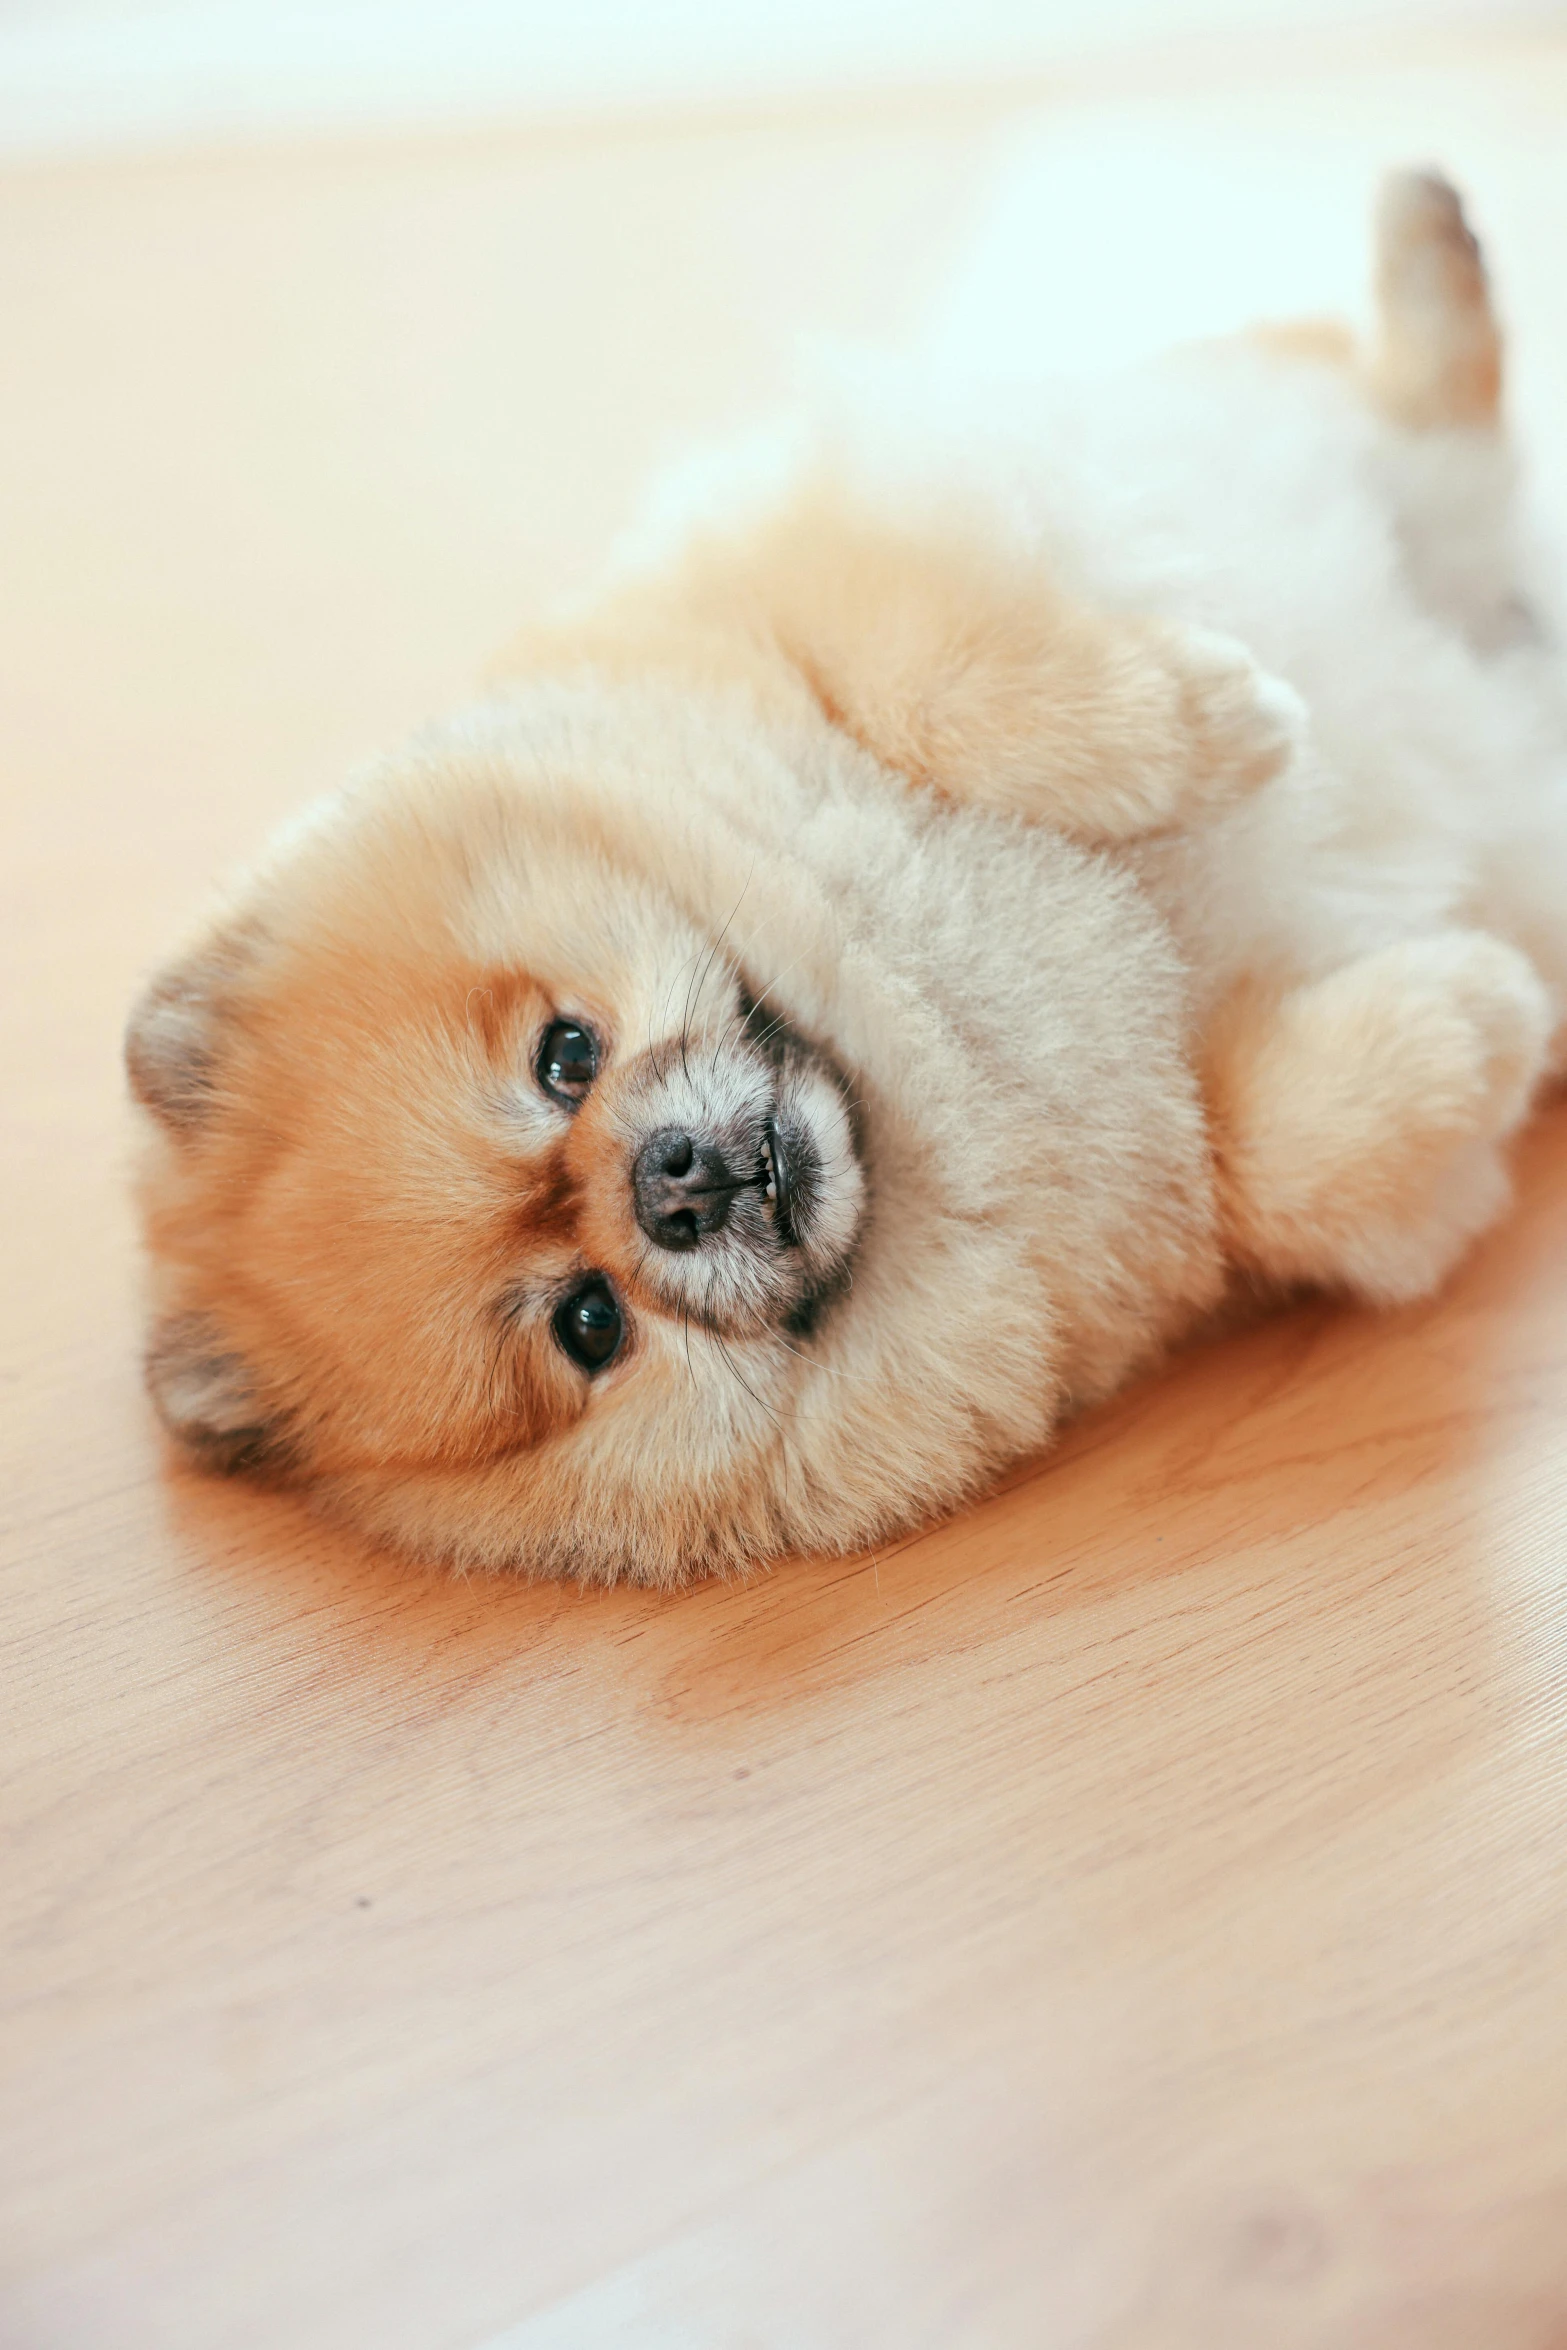 a small brown dog laying on top of a wooden floor, trending on reddit, mingei, pomeranian, cute! c4d, square, realistic photo”